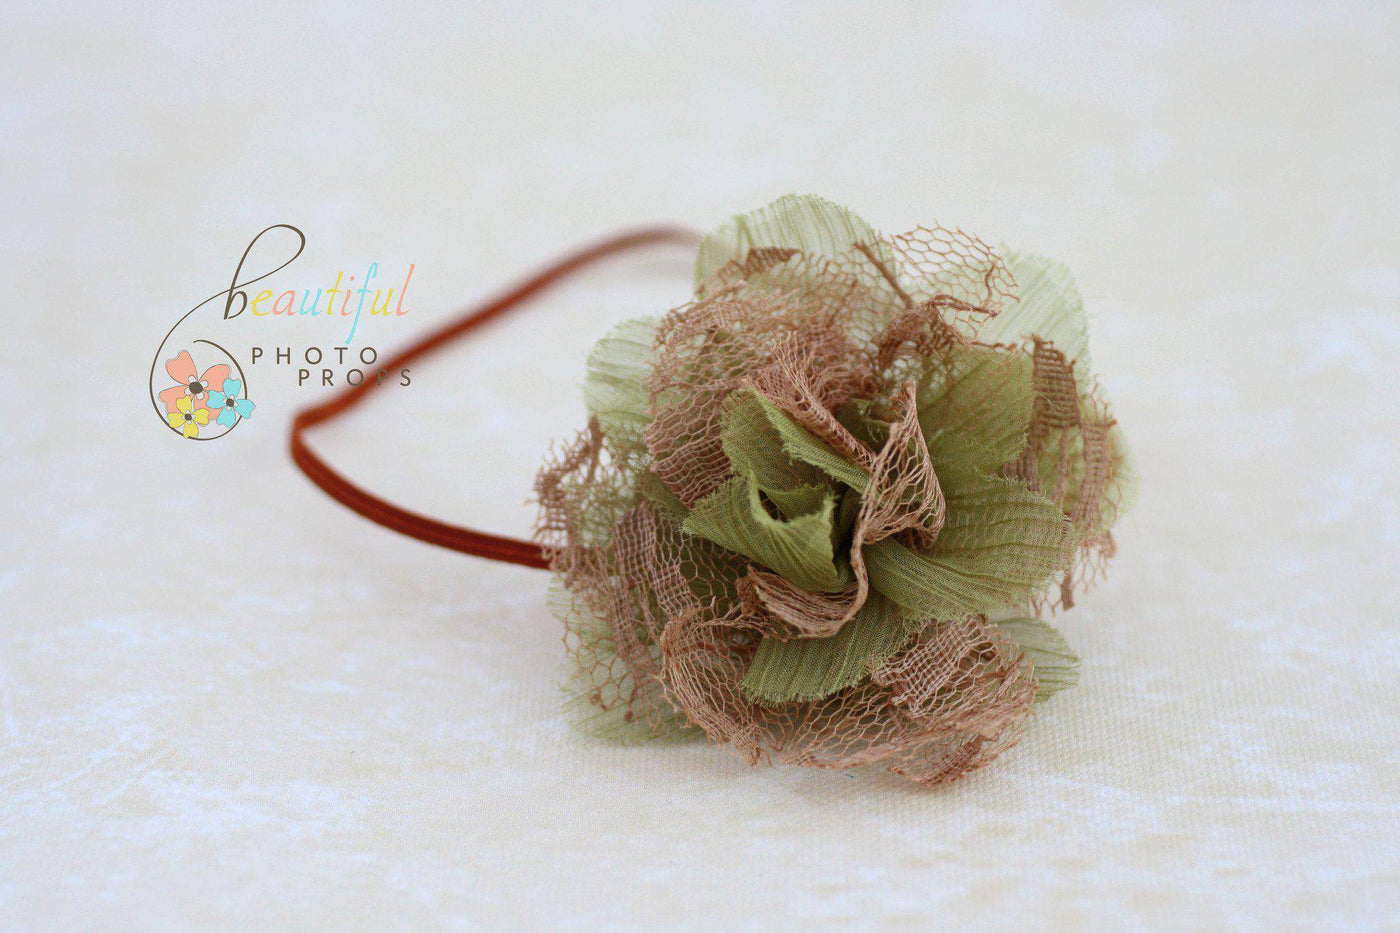 Olive Green and Brown Petals Flower Tulle Headband - Beautiful Photo Props